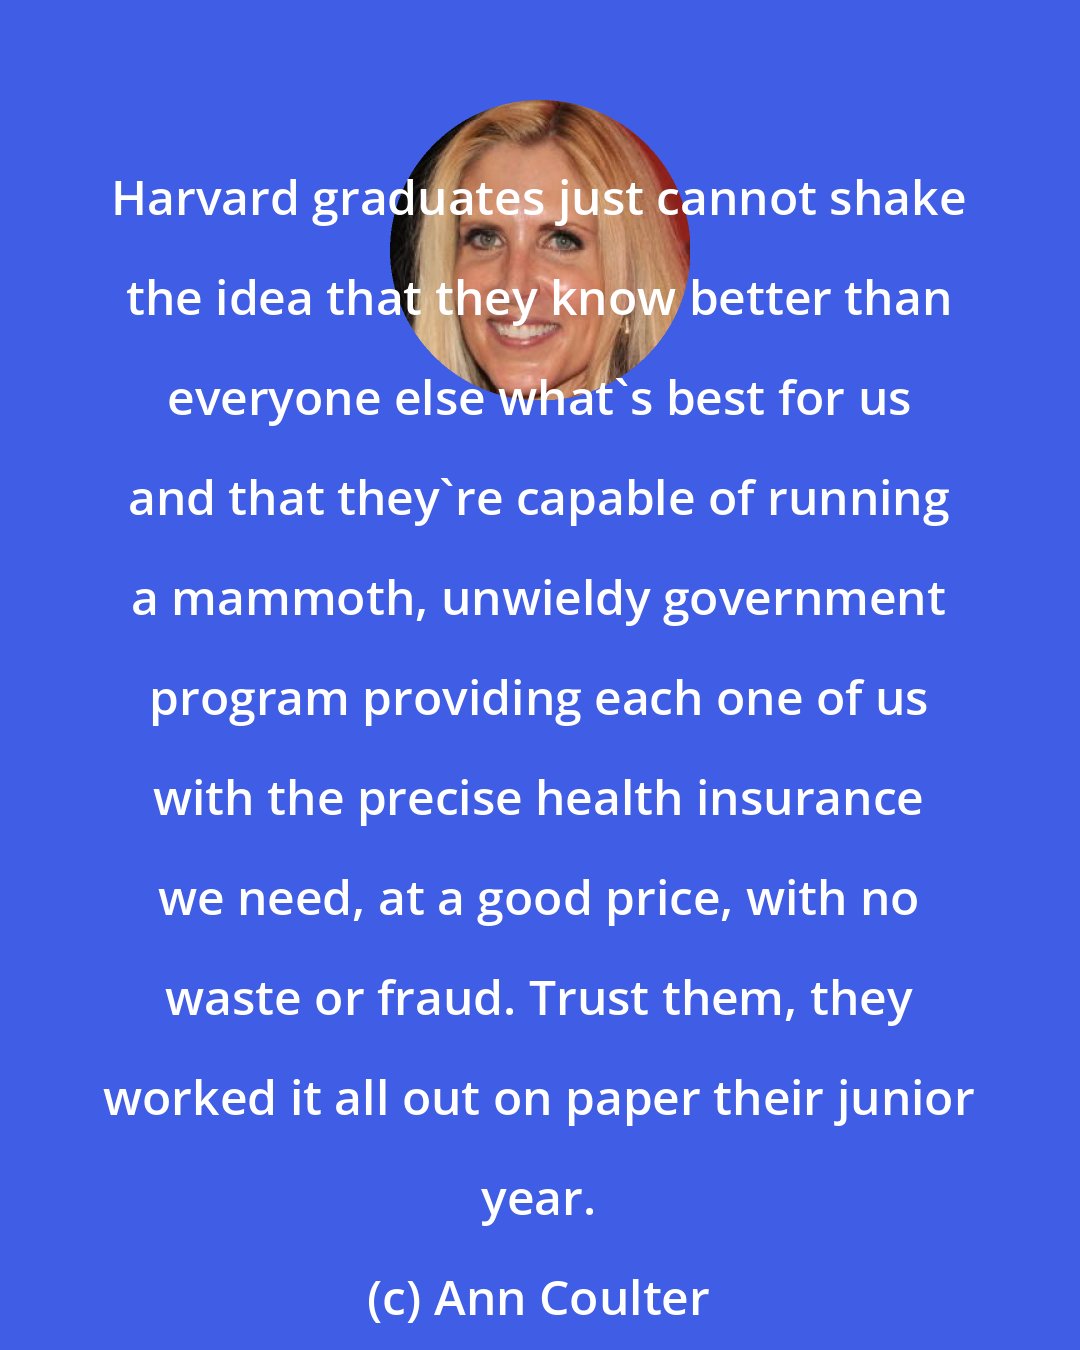 Ann Coulter: Harvard graduates just cannot shake the idea that they know better than everyone else what's best for us and that they're capable of running a mammoth, unwieldy government program providing each one of us with the precise health insurance we need, at a good price, with no waste or fraud. Trust them, they worked it all out on paper their junior year.